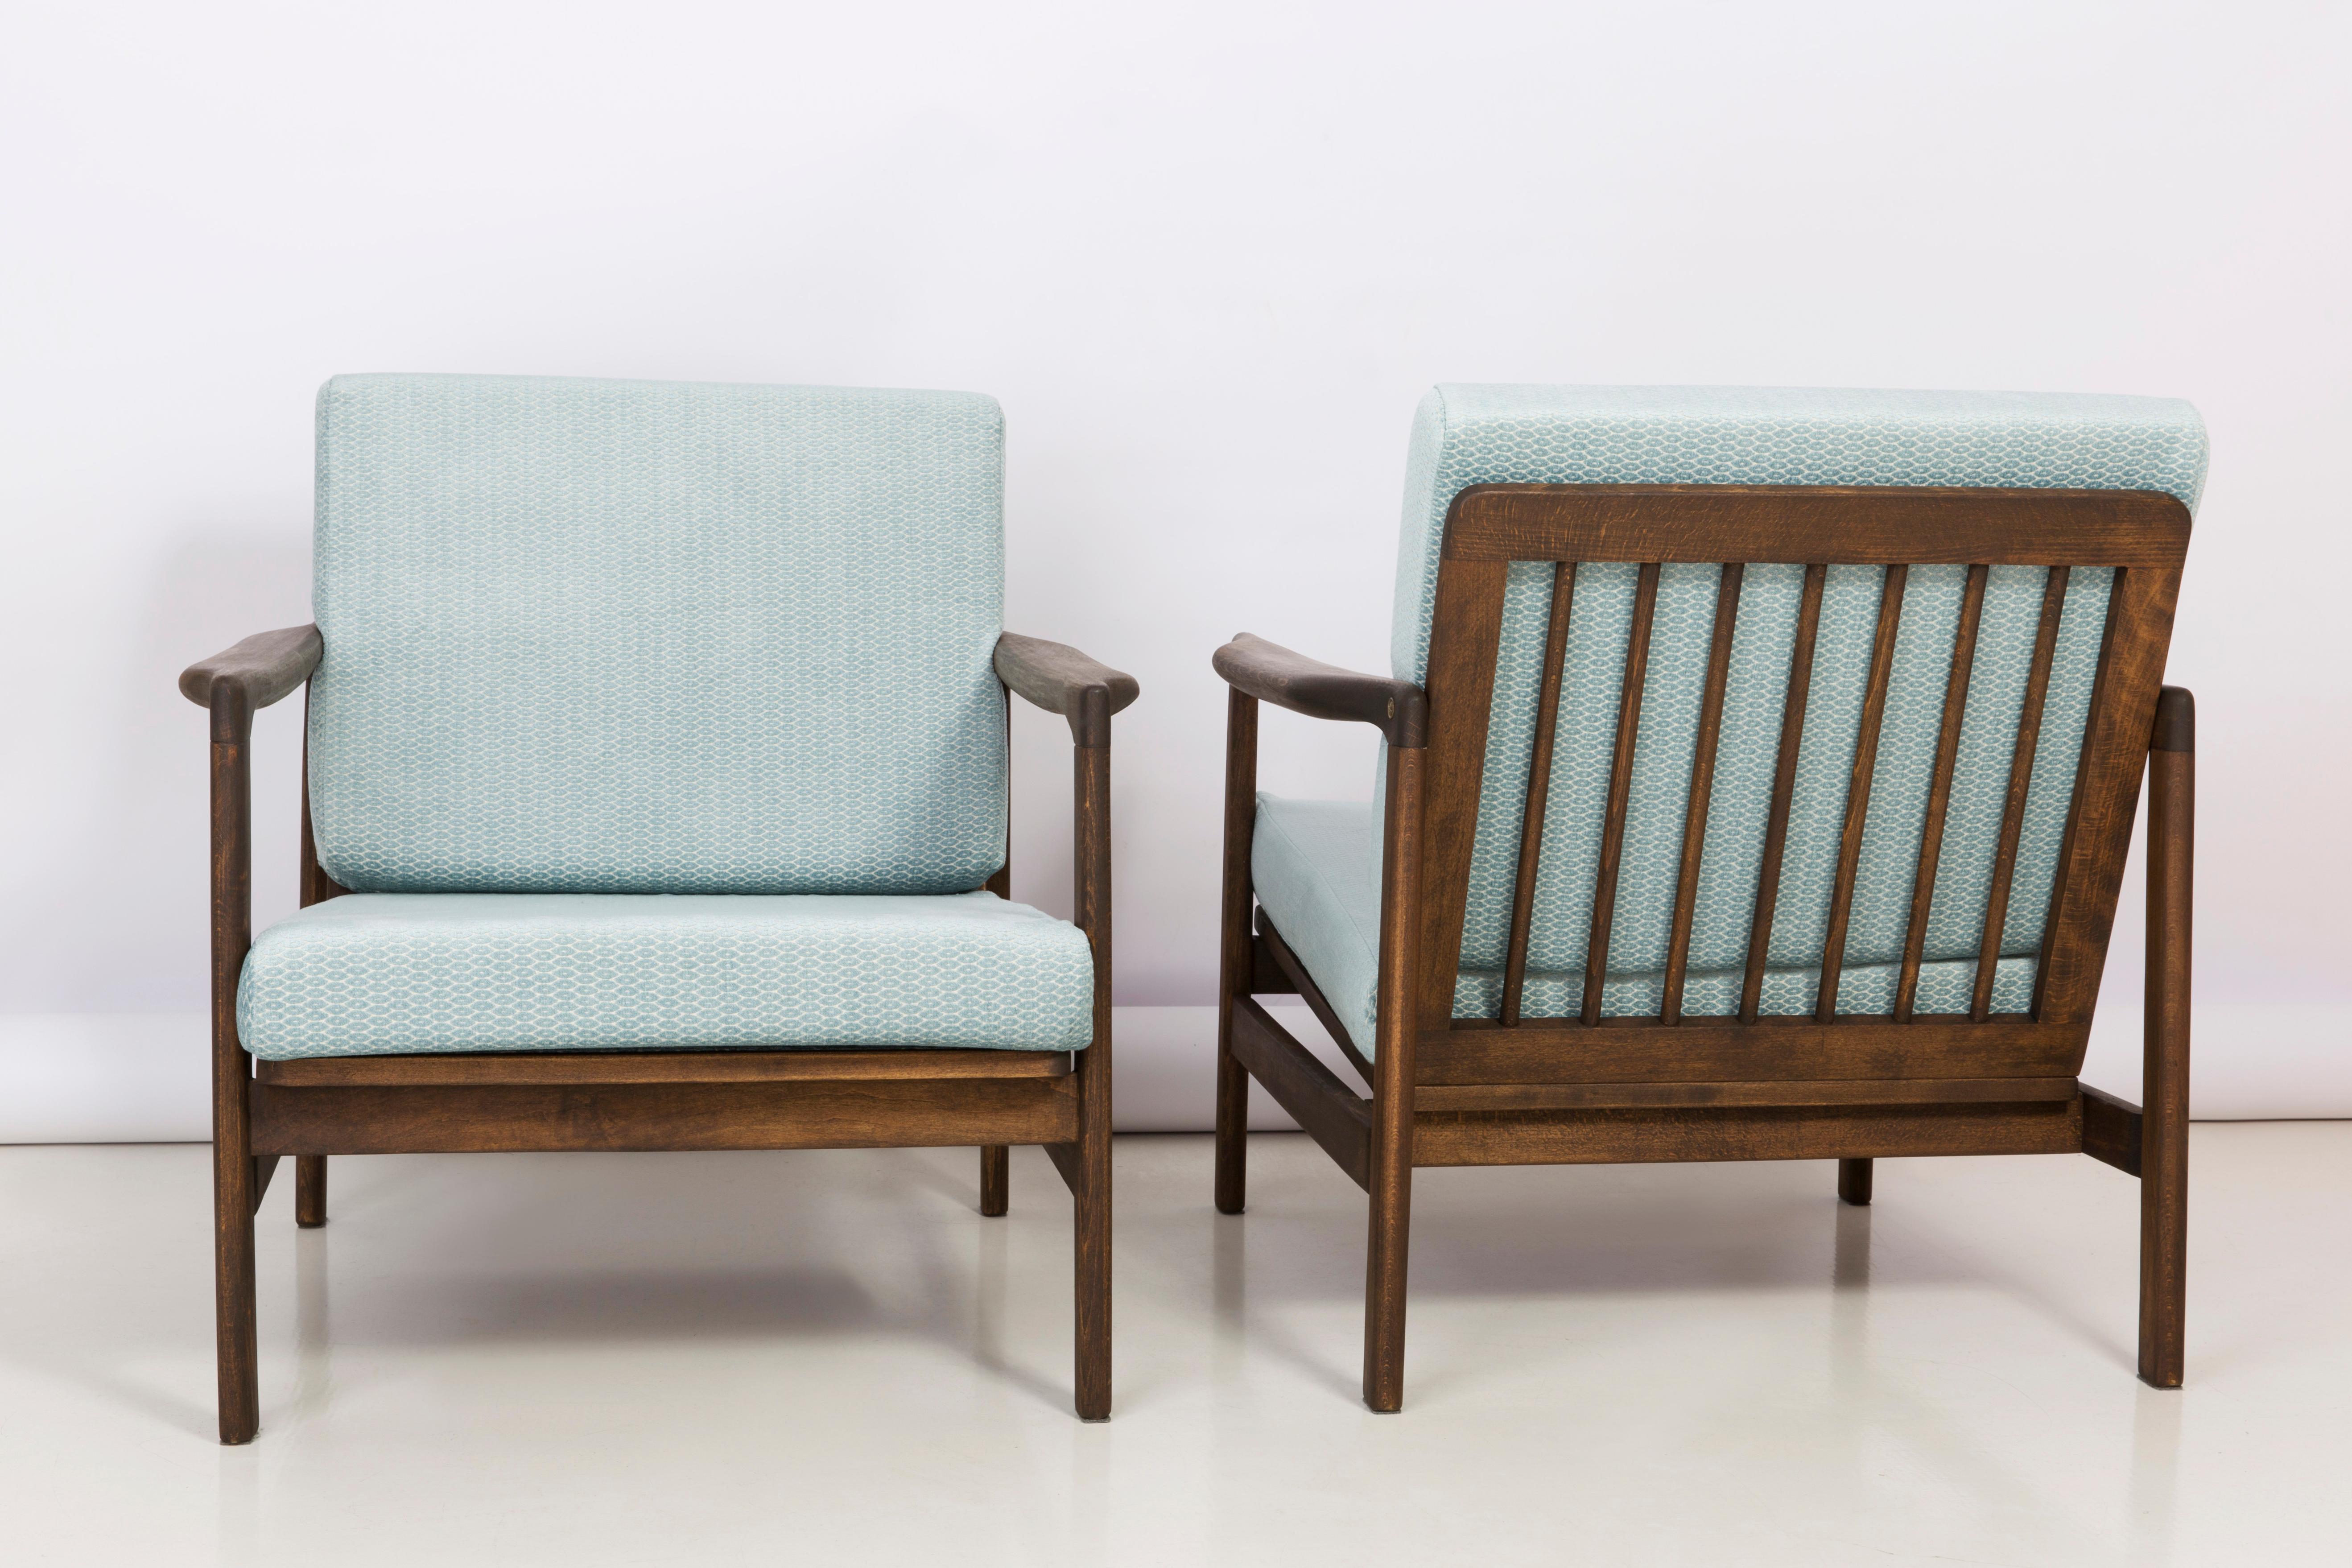 Beech Set of Two Midcentury Blue Velvet Armchairs with Stools, Zenon Baczyk, 1960s For Sale